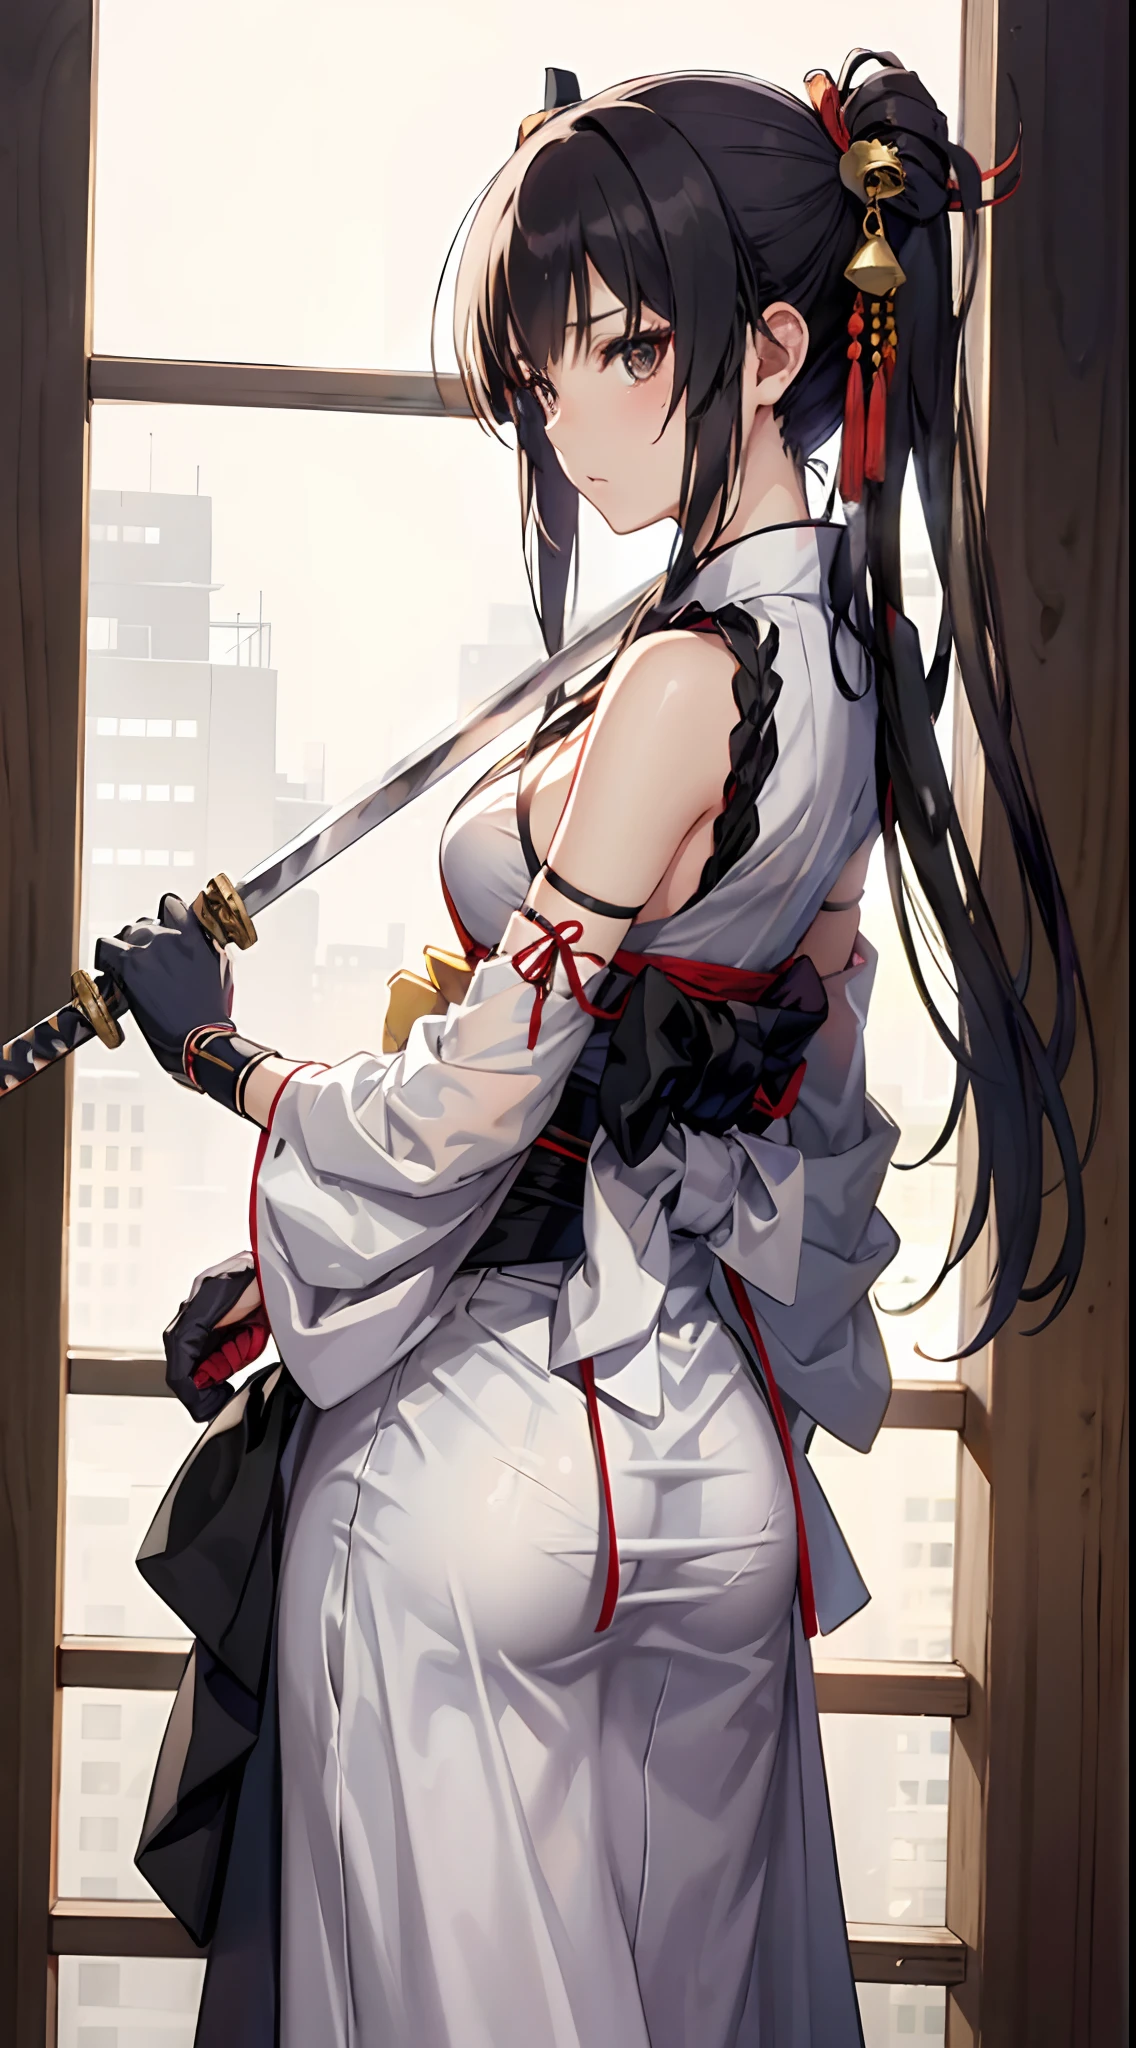 ((slanted eye)),(A MILF),(((maturefemale,adult  woman))),Solo,masutepiece,top-quality, ultra-definition, max resolution, A highly detailed, ((White Doshi,Black Hakama,KENDOU)),A Japanese style,dojo,Beautiful black hair、Black eyes,Tying hair,Holding a sword,Swinging a wooden sword,Sweating,Front view